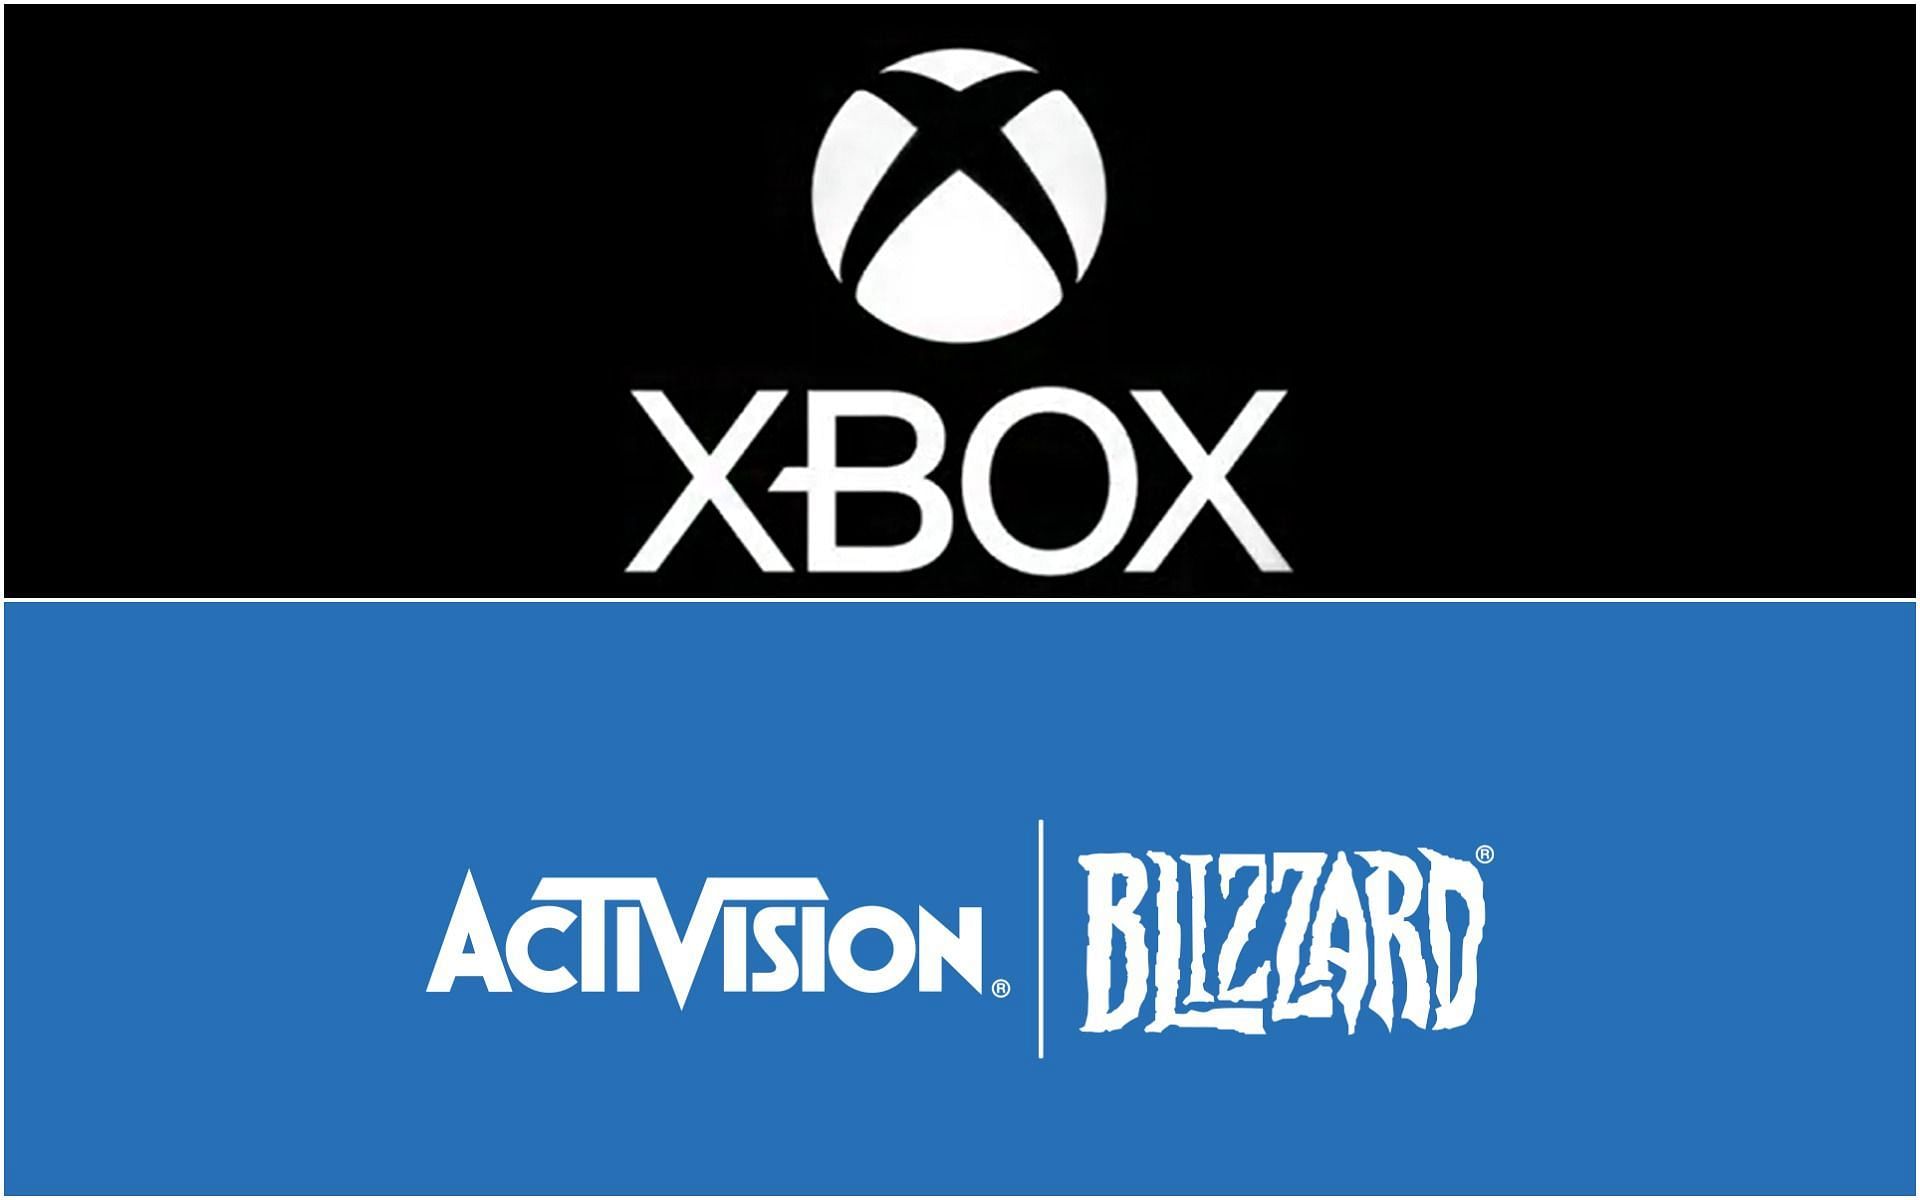 Microsoft announced today that they are buying Activision Blizzard (Image via Sportskeeda)